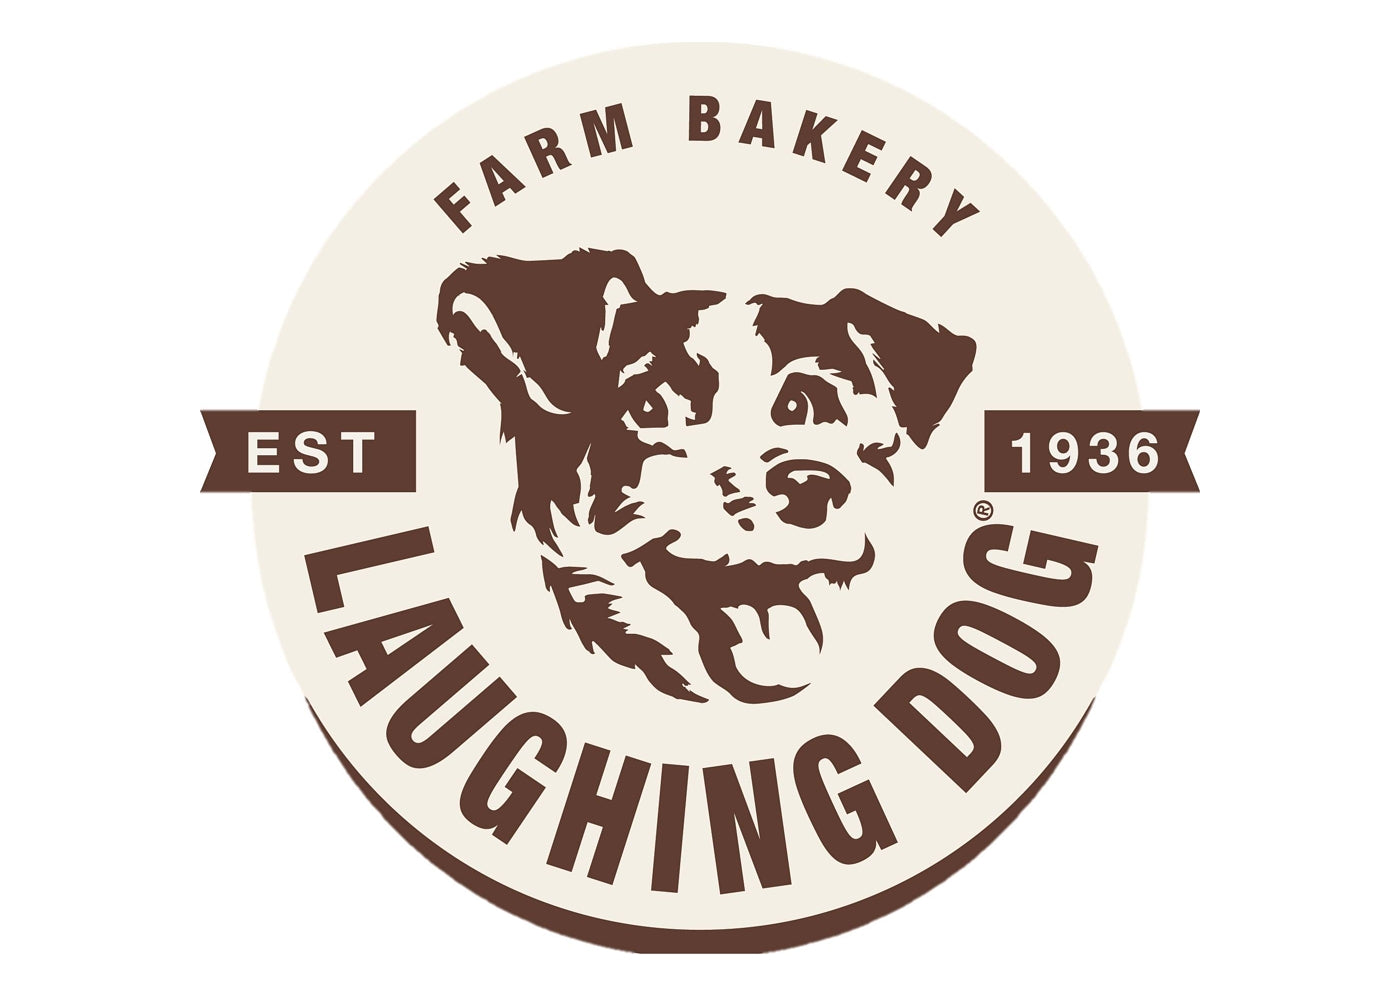 Laughing Dog - Traditional Mixer Meal for Adult Dogs